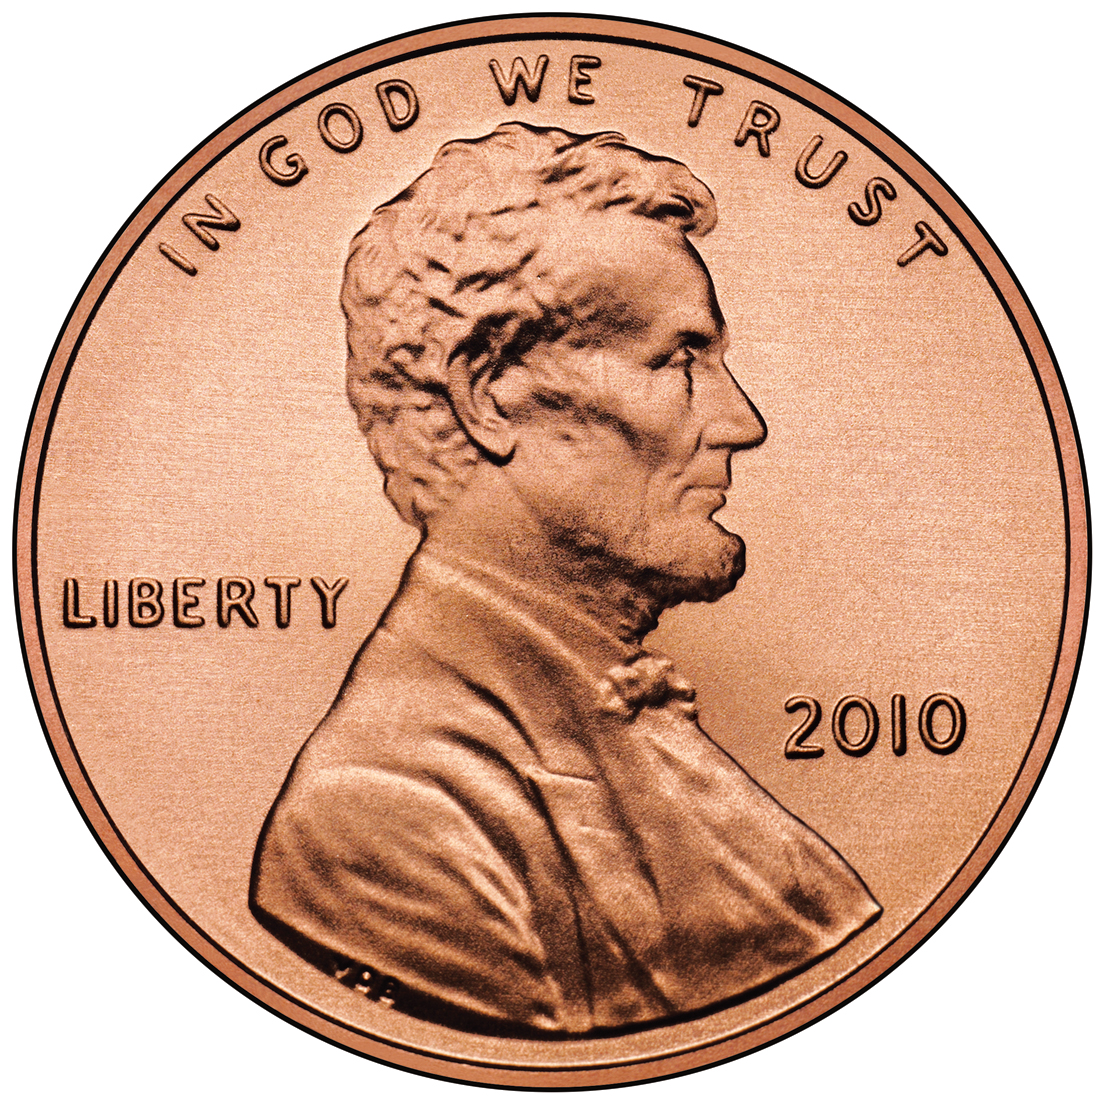 The obverse ("heads" side) of the U.S. one cent coin. This image was obtained from Wikimedia Commons; its source is a United States Mint photo (public domain).